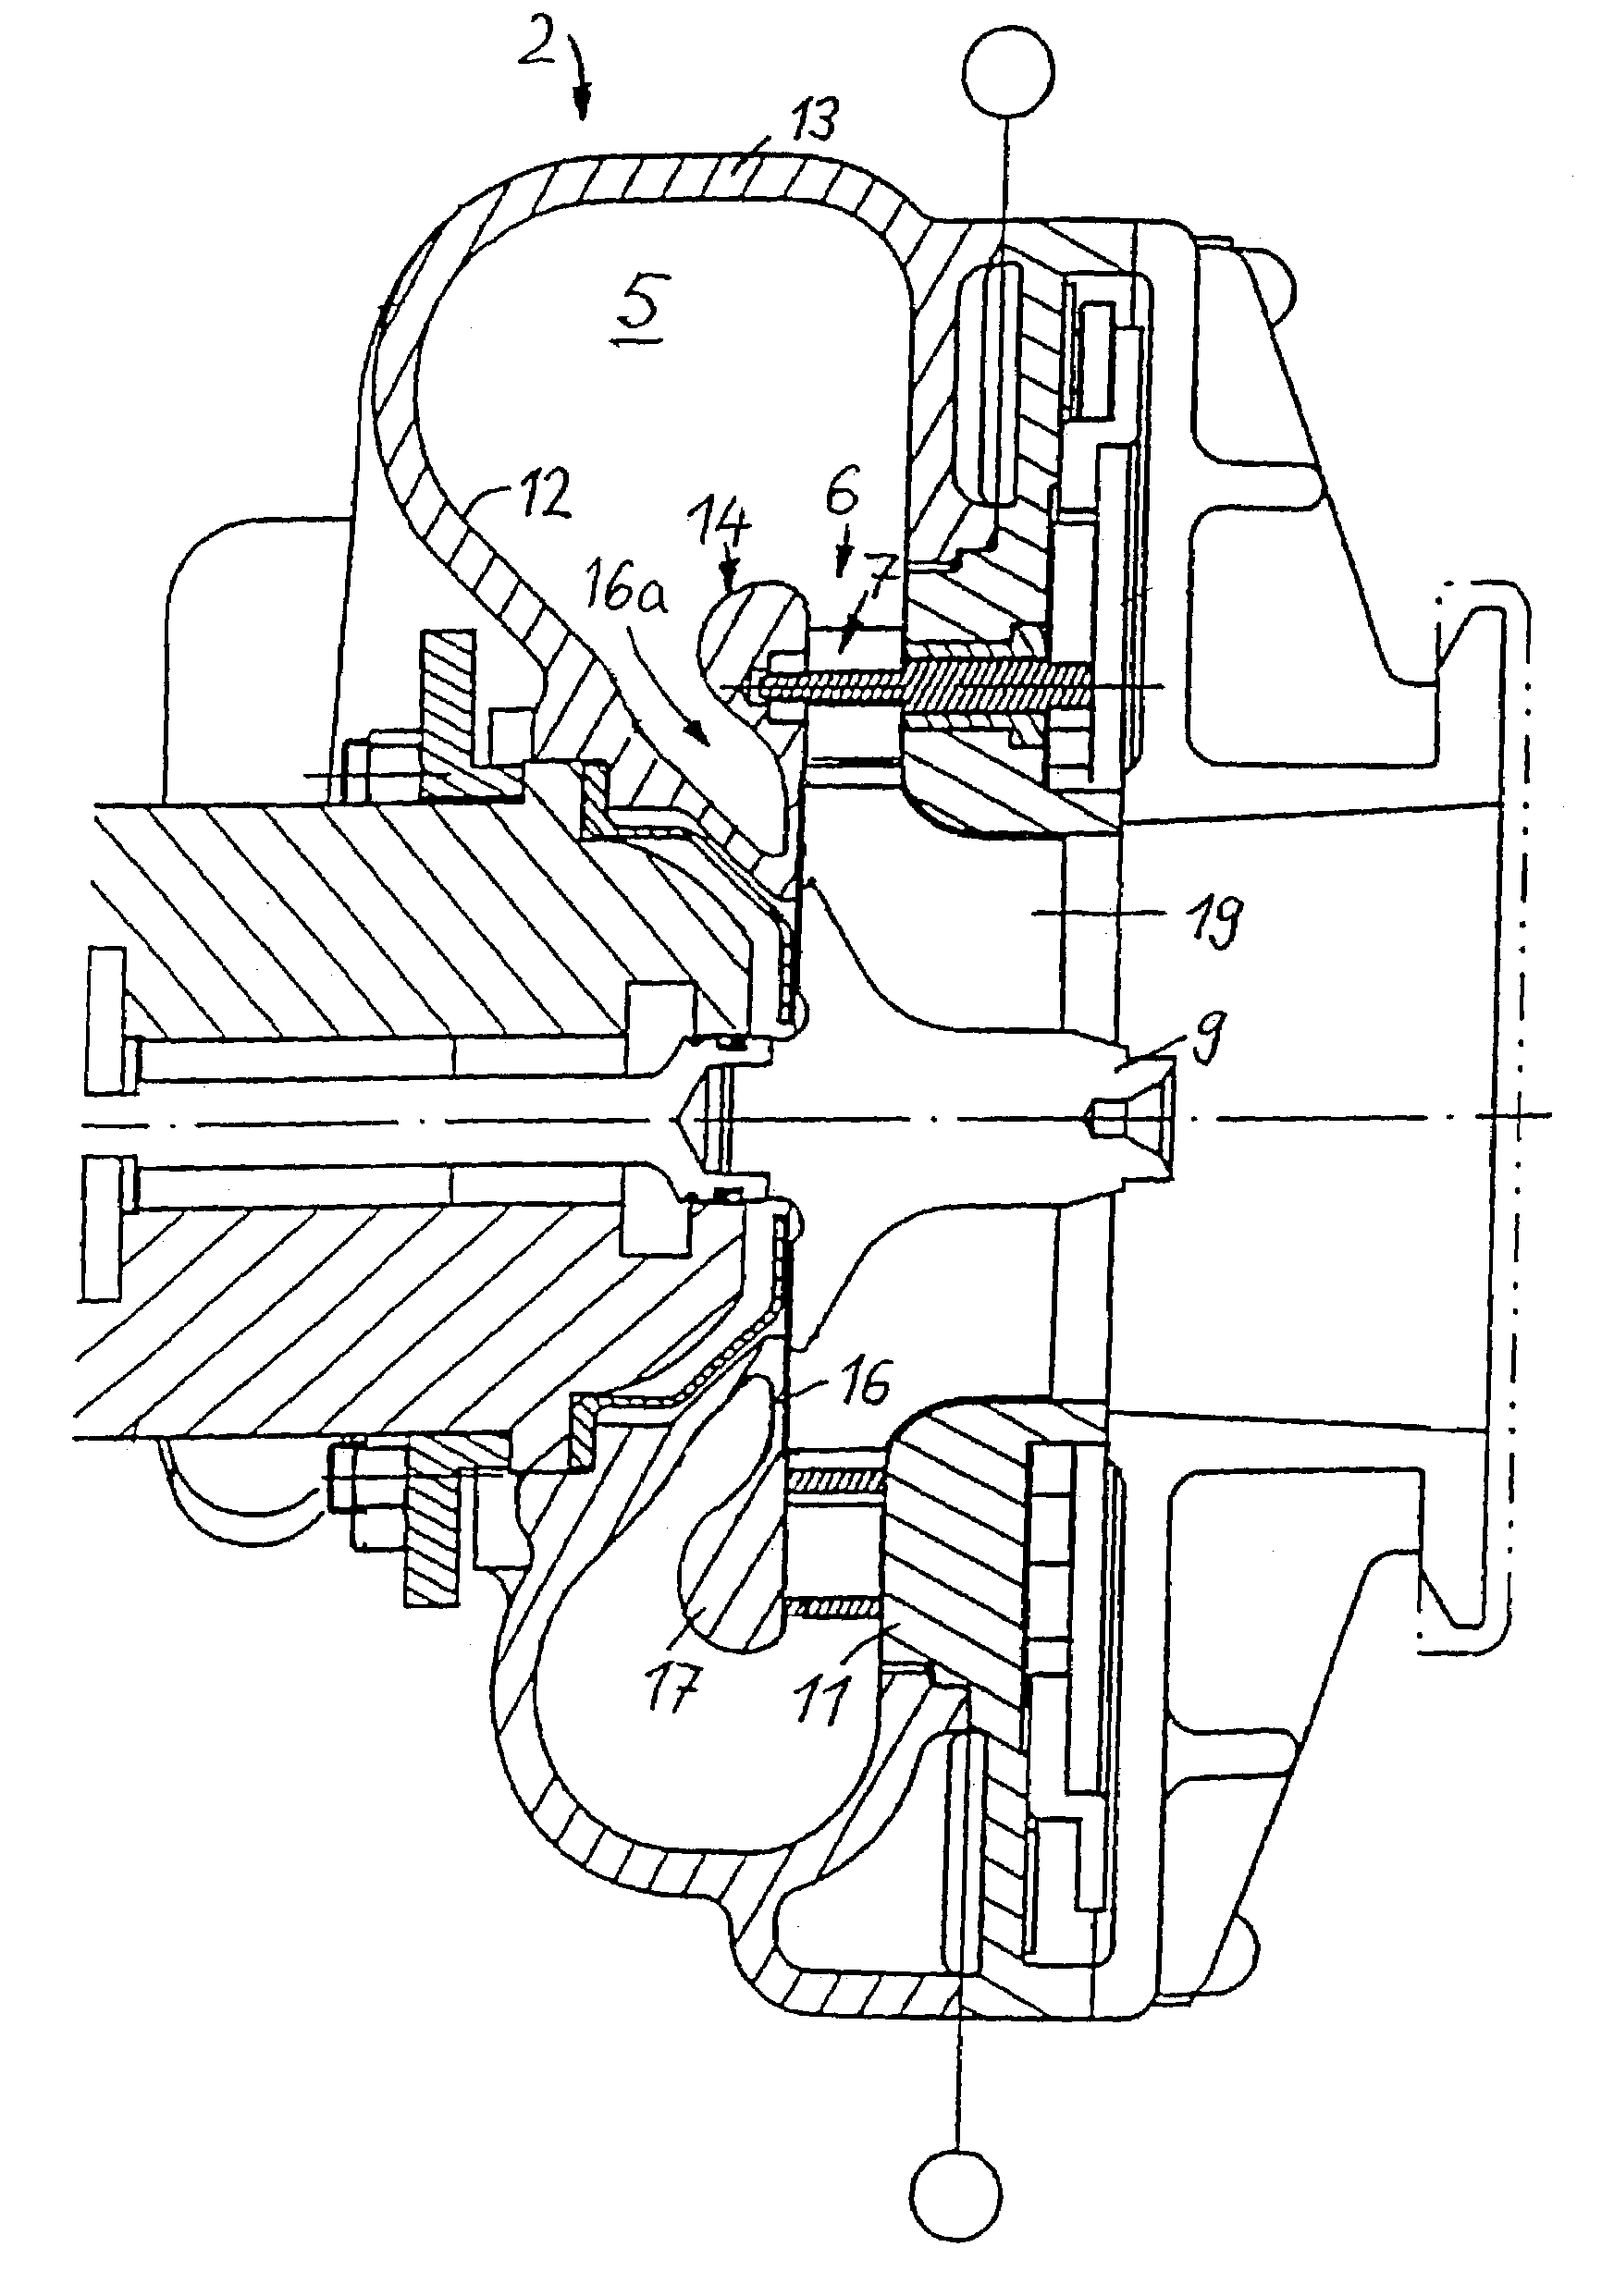 Exhaust-gas turbocharger for an internal combustion engine with variable turbine geometry